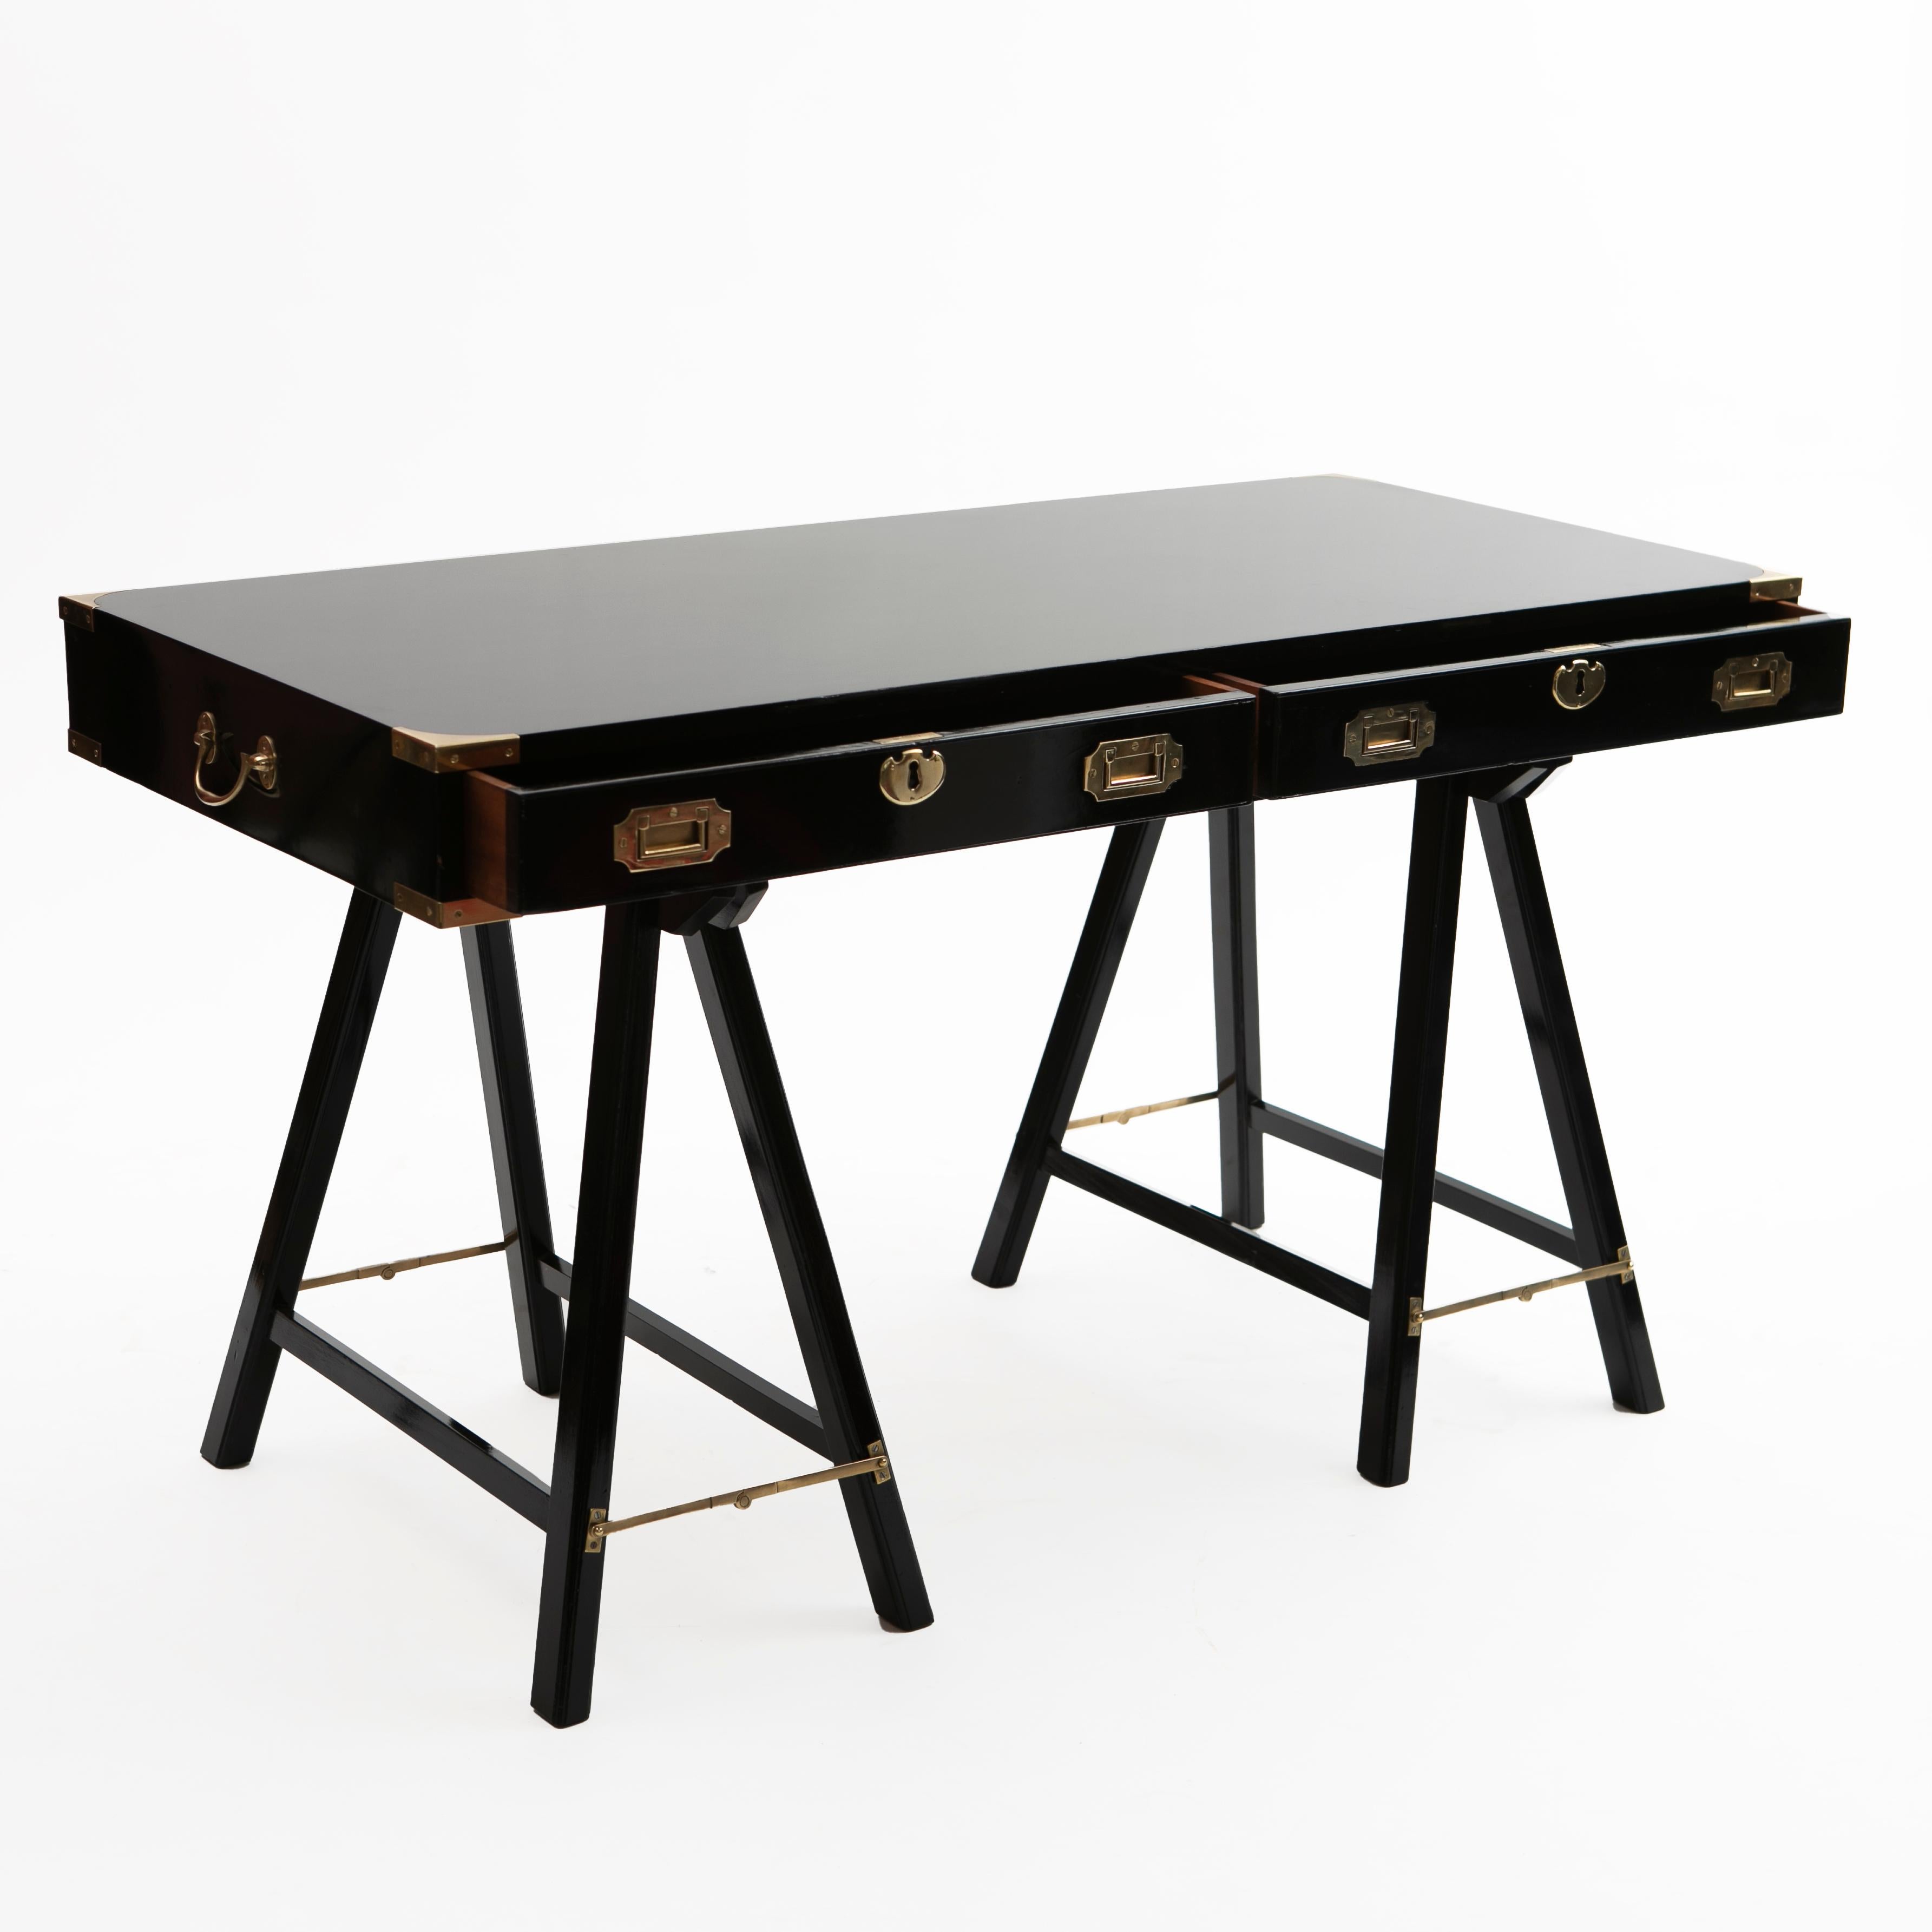 English military campaign trestle desk in black polished mahogany.
Front with two large size drawers with original brass handles and locks. The top separates from the base for easy transportation, fitted with carrying handles on both sides. Raised